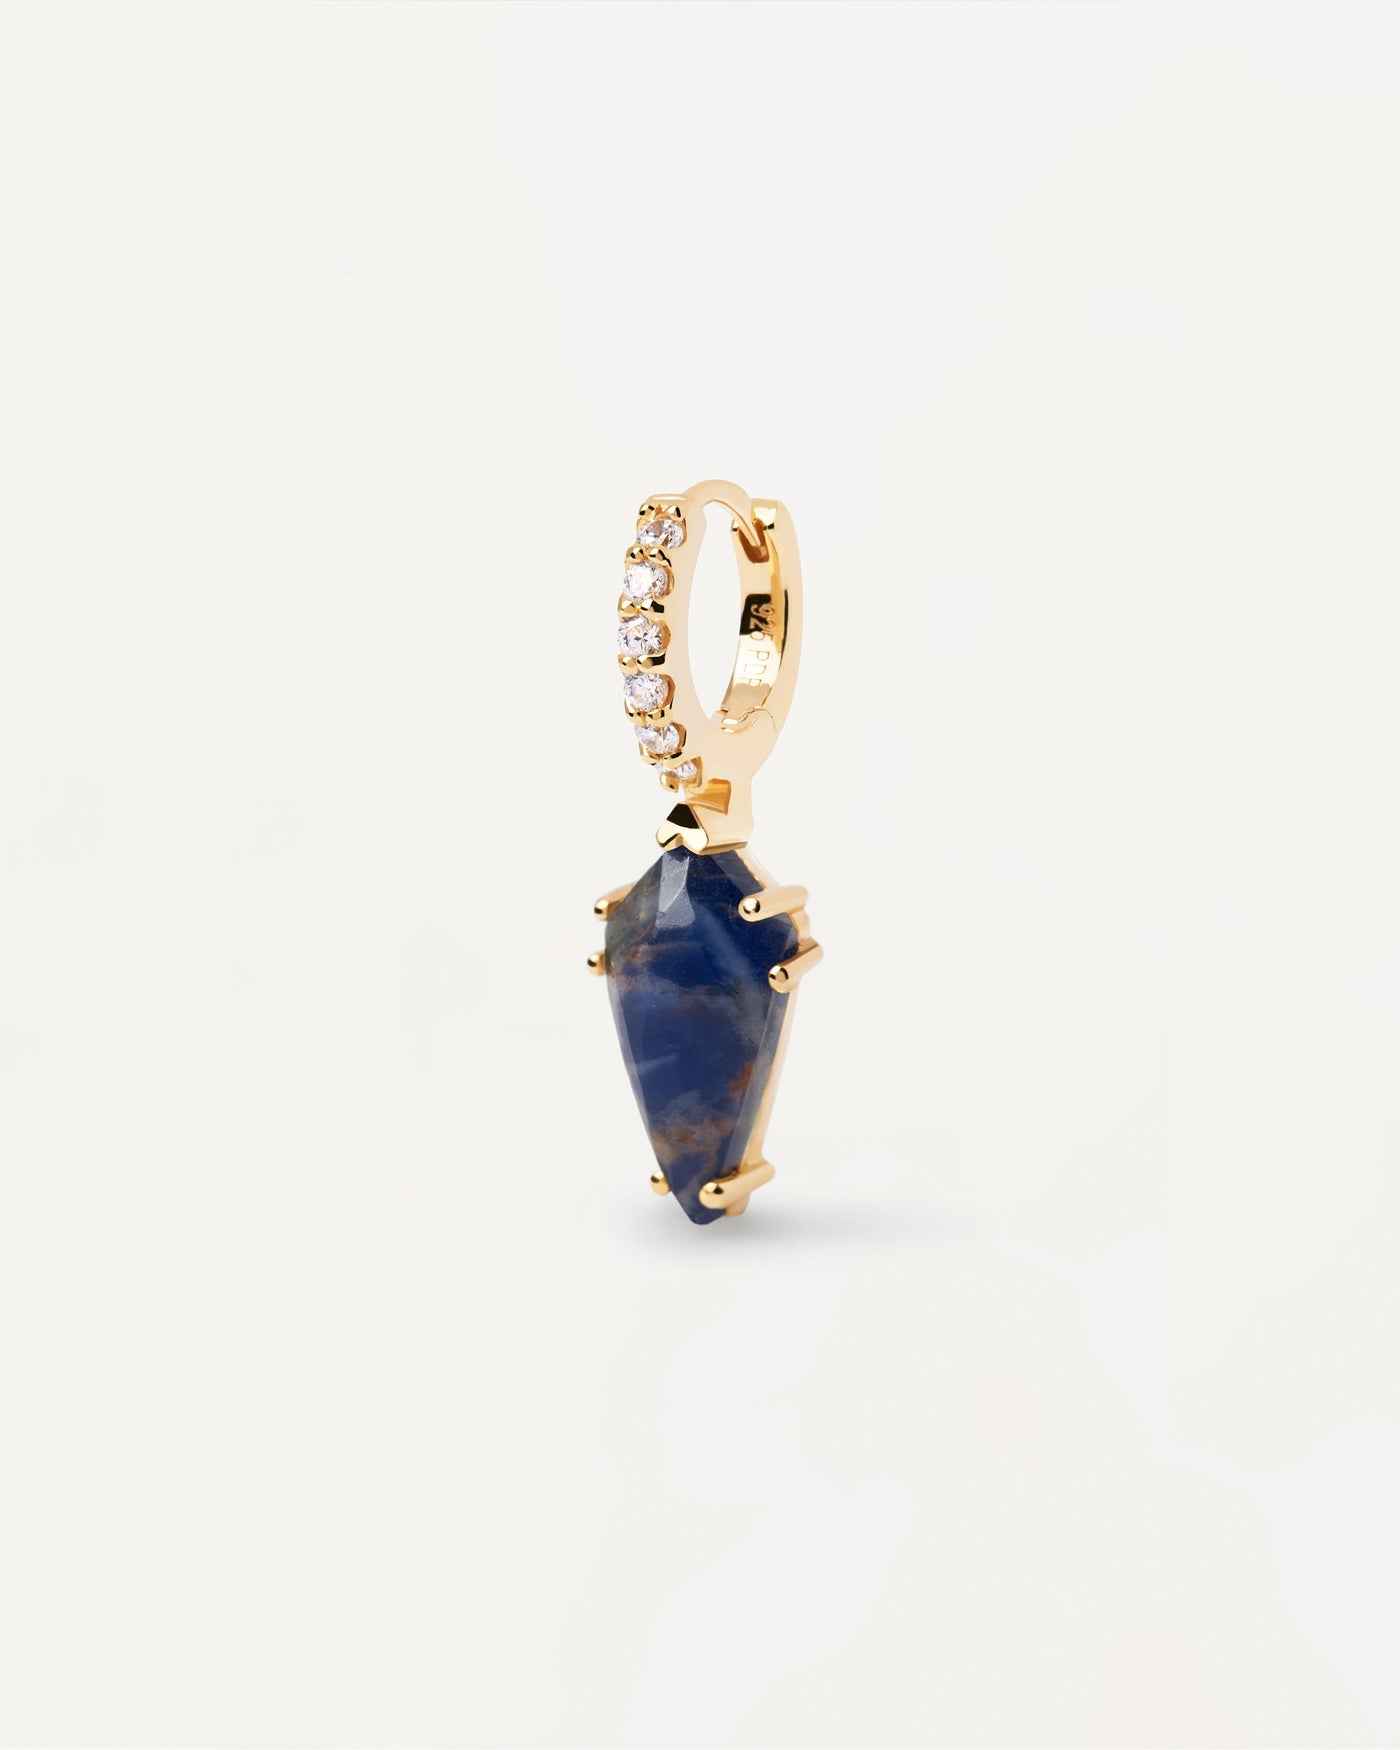 2023 Selection | Naoki Sodalite Single Earring. Gold-plated hoop ear piercing with white zirconia and brown pointed gemstone pendant. Get the latest arrival from PDPAOLA. Place your order safely and get this Best Seller. Free Shipping.